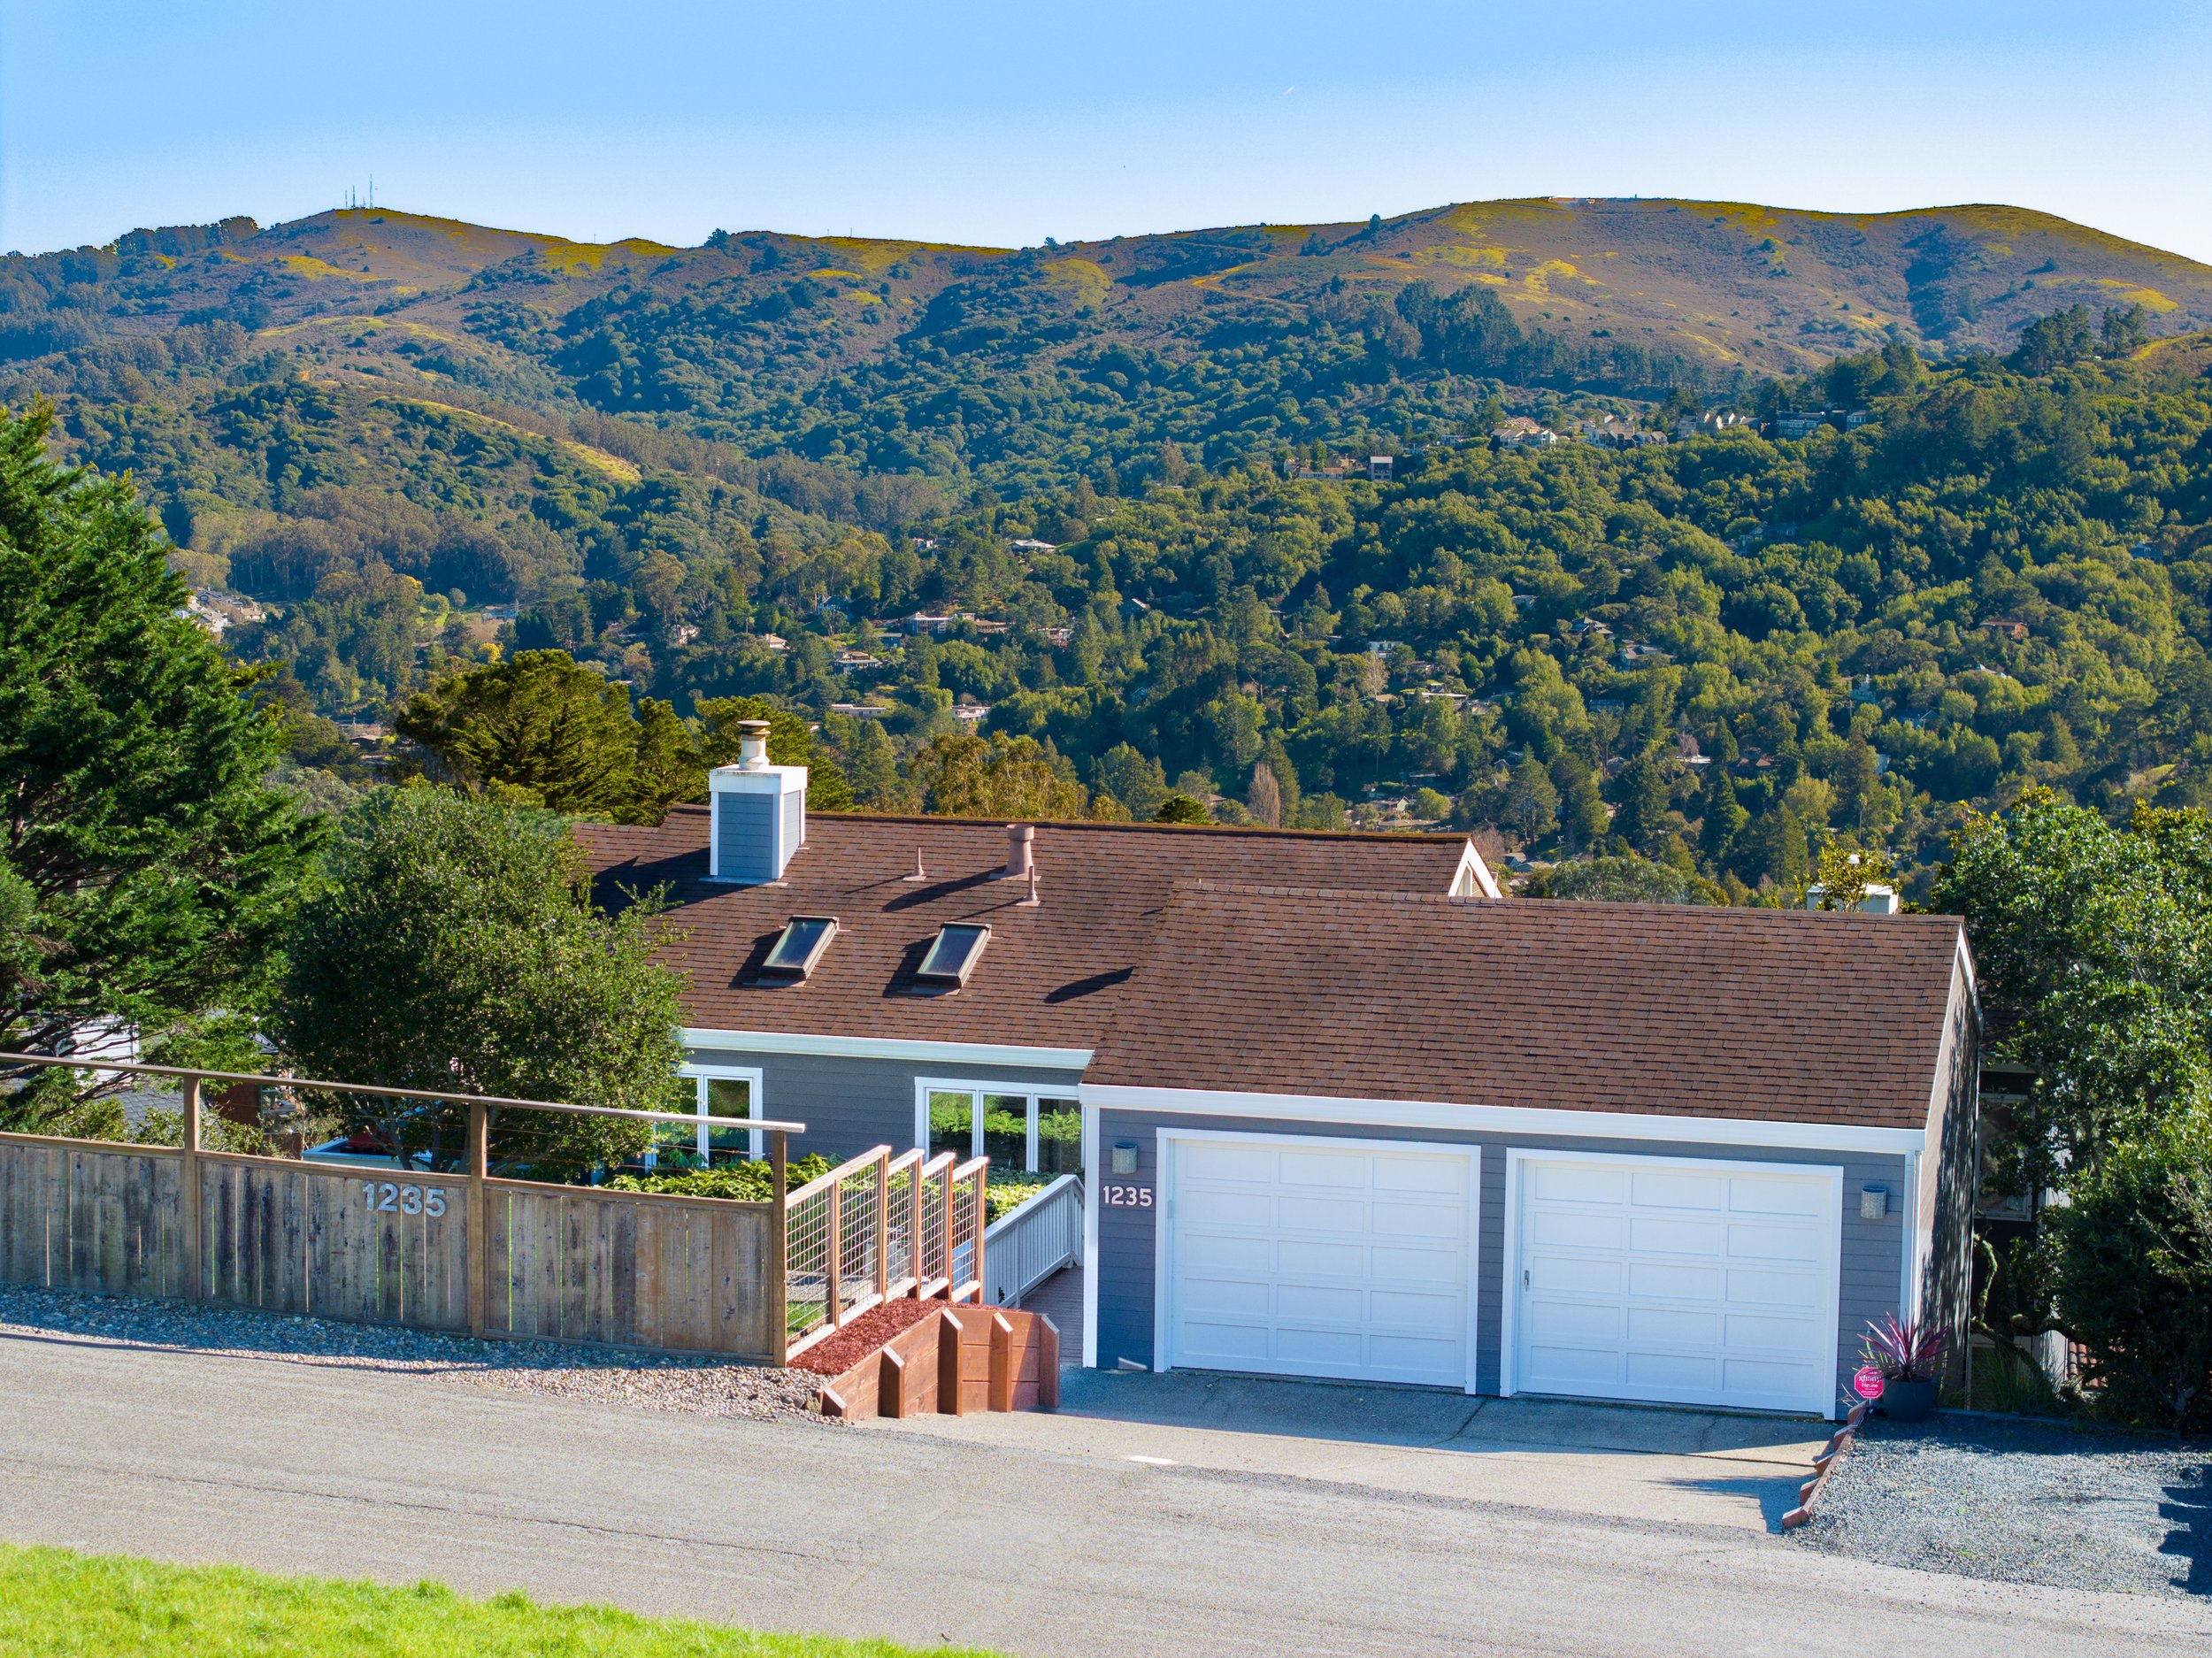 1235 Waterview Drive, Mill Valley Listed by Mill Valley Realtor Allie Fornesi at Own Marin-43.jpg